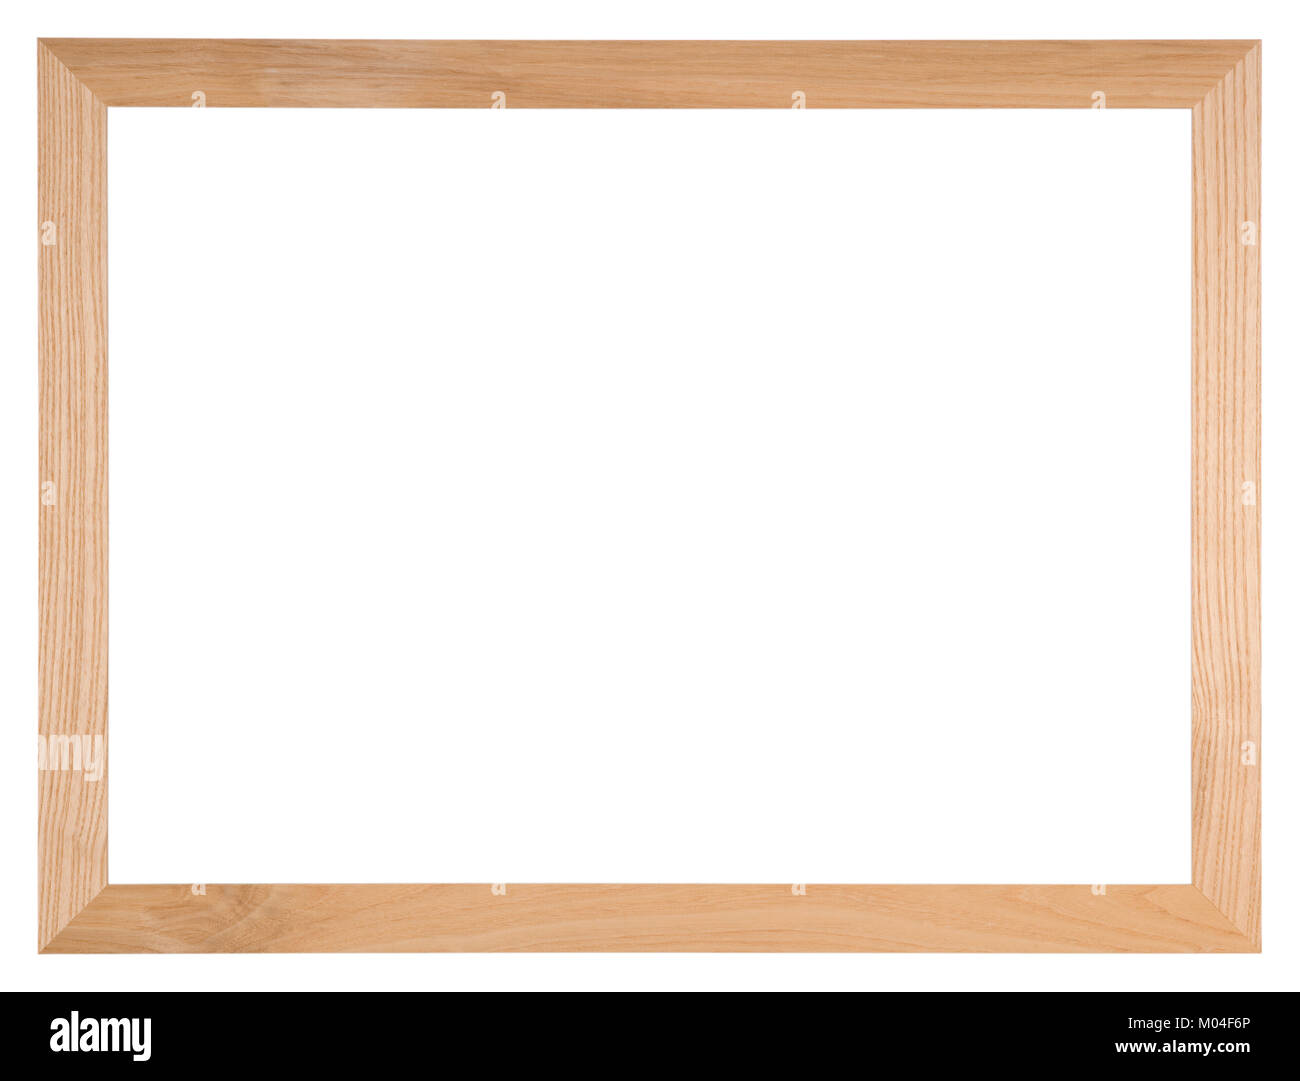 Empty picture frame isolated on white, landscape format, in light oak wood Stock Photo